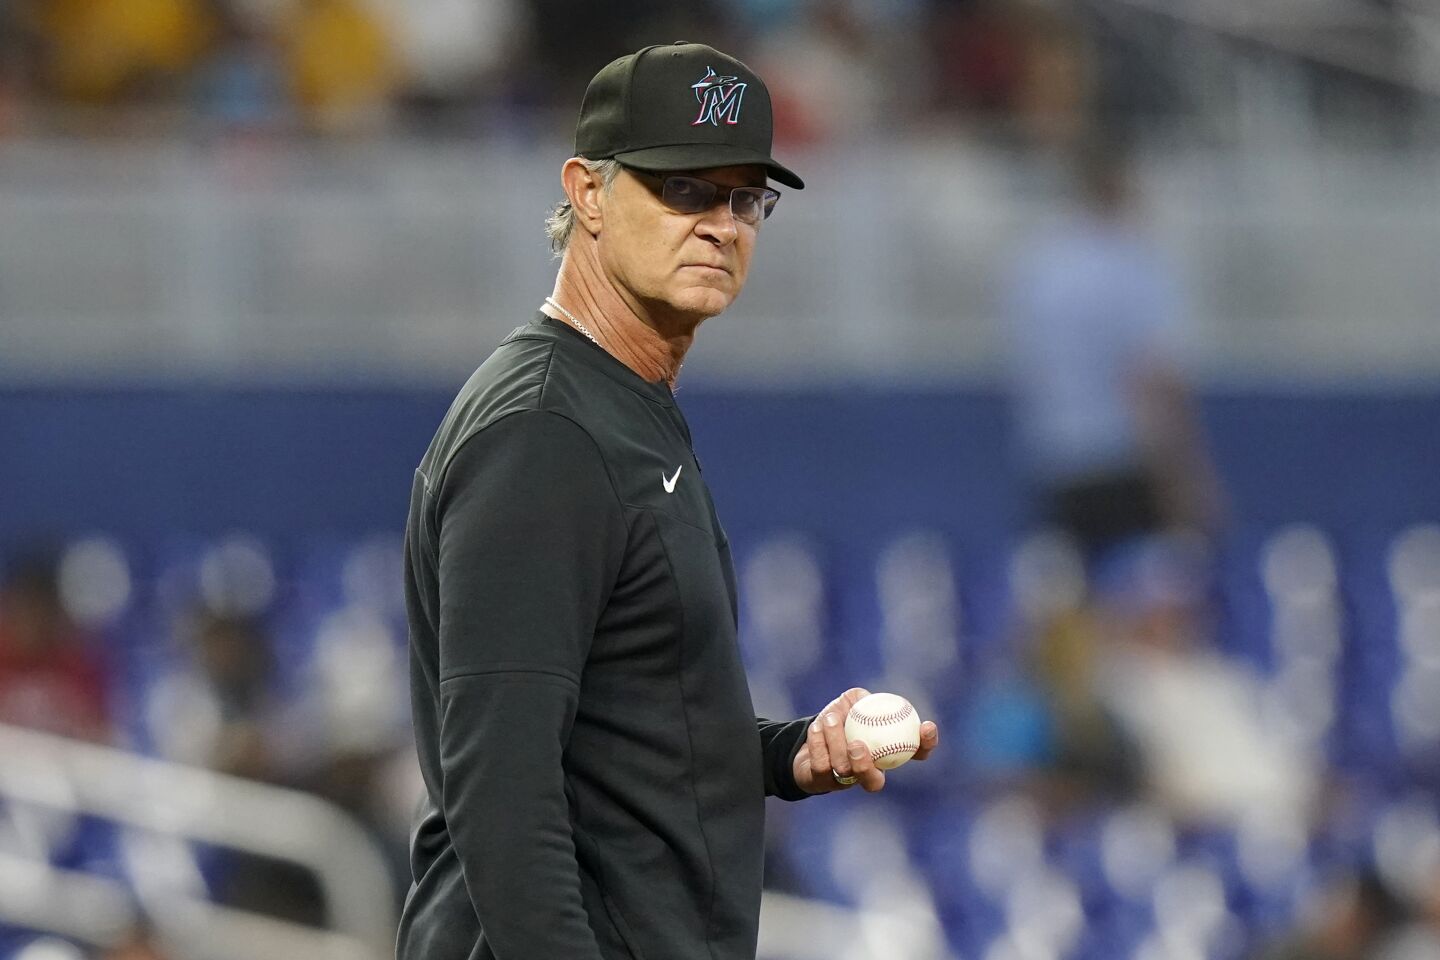 24 | Miami Marlins (63-90; LW: 24)Don Mattingly walking away with more wins than any other manager in Marlins history (437), but his .428 winning percentage more an indictment on the organization than him (as was certainly the case while winning three NL West titles in five years with the Dodgers).